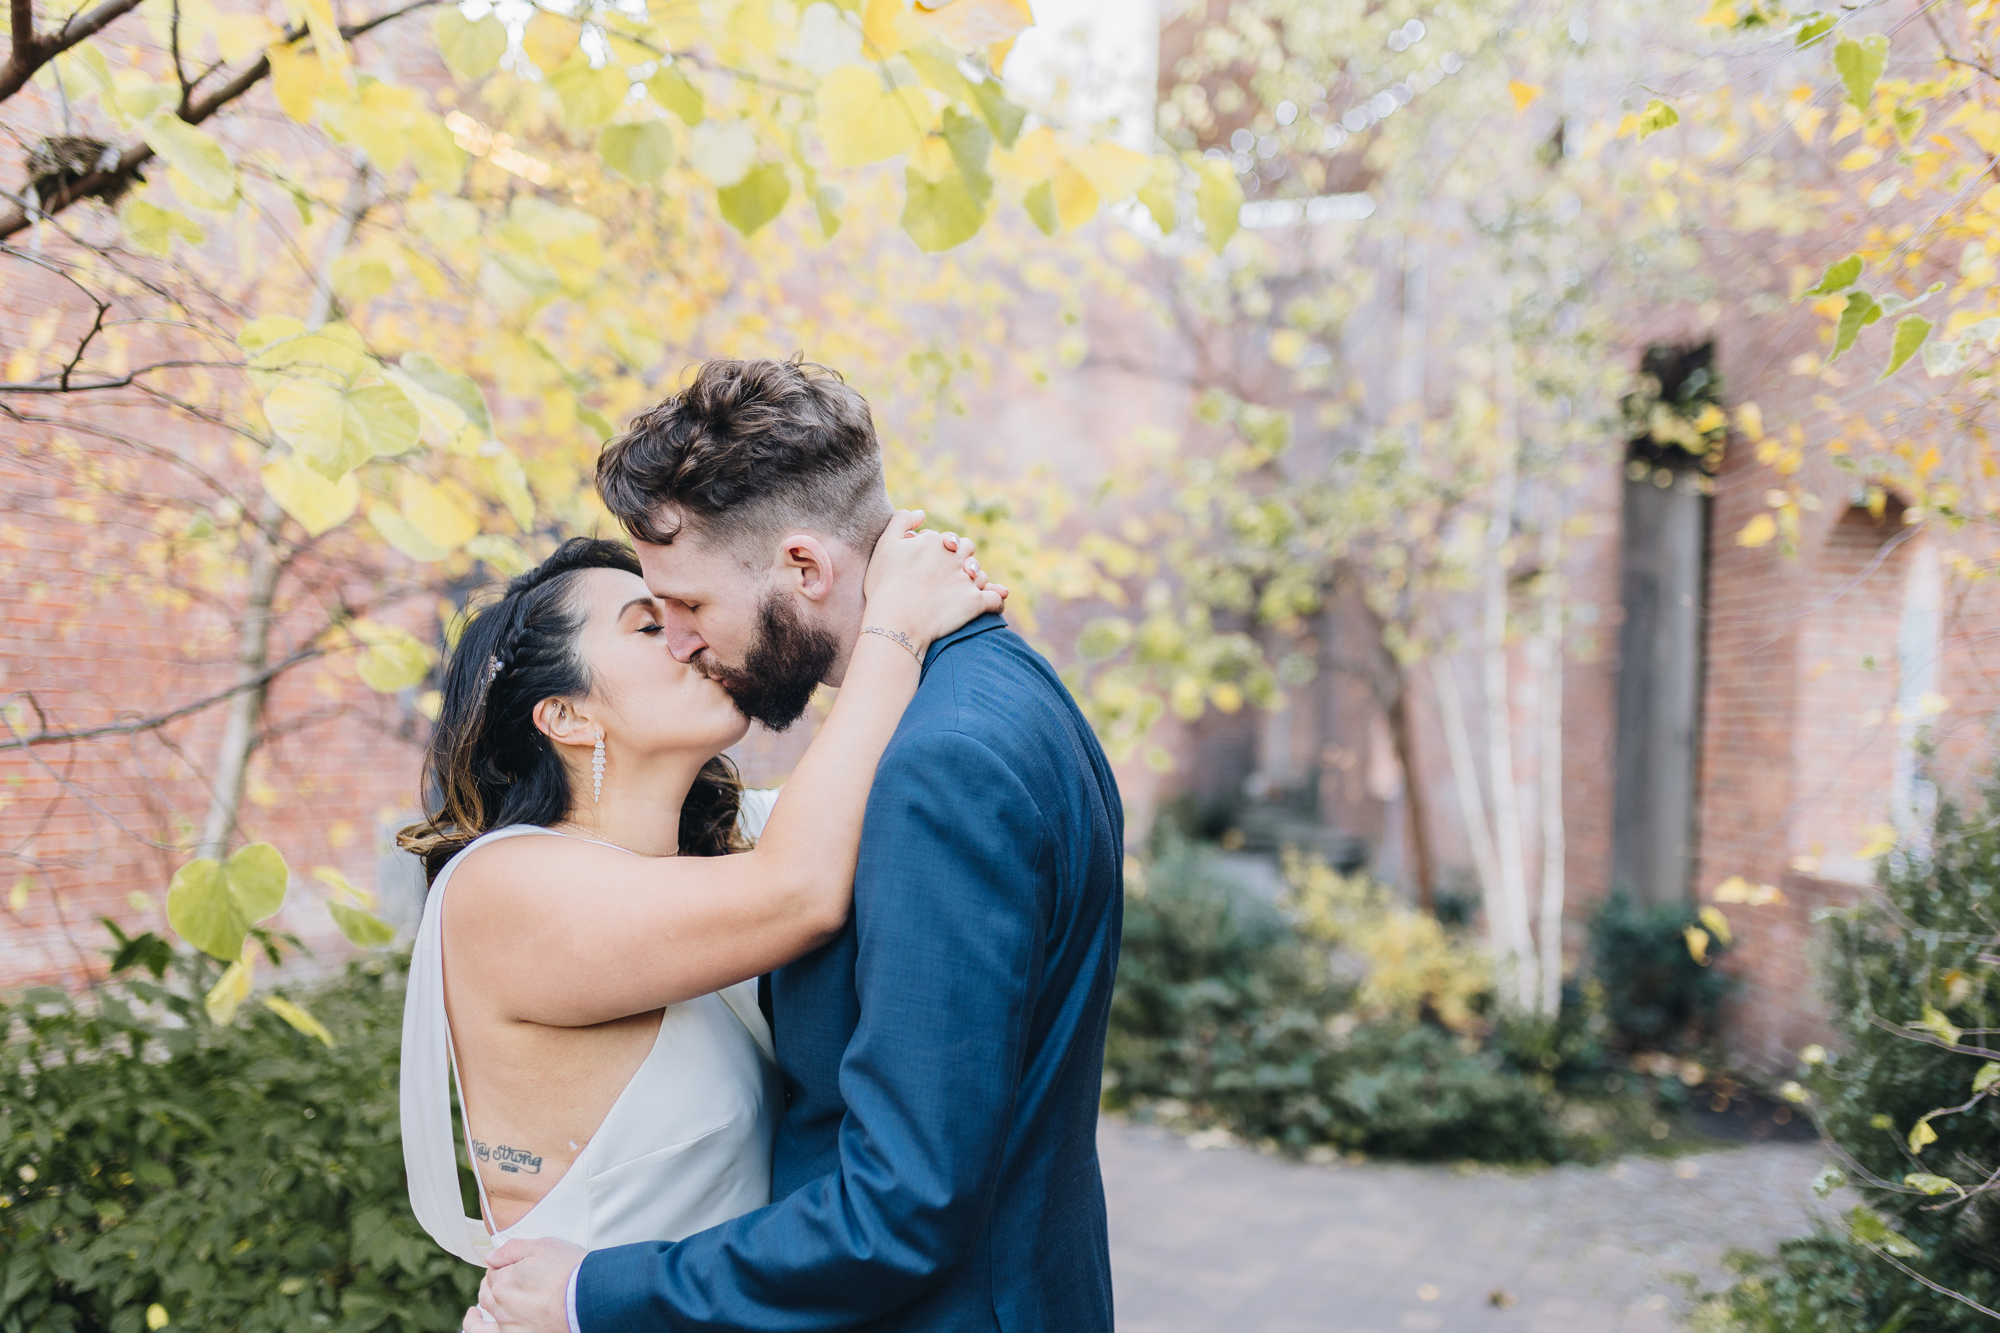 Pretty Fall DUMBO Elopement with NYC views and foliage